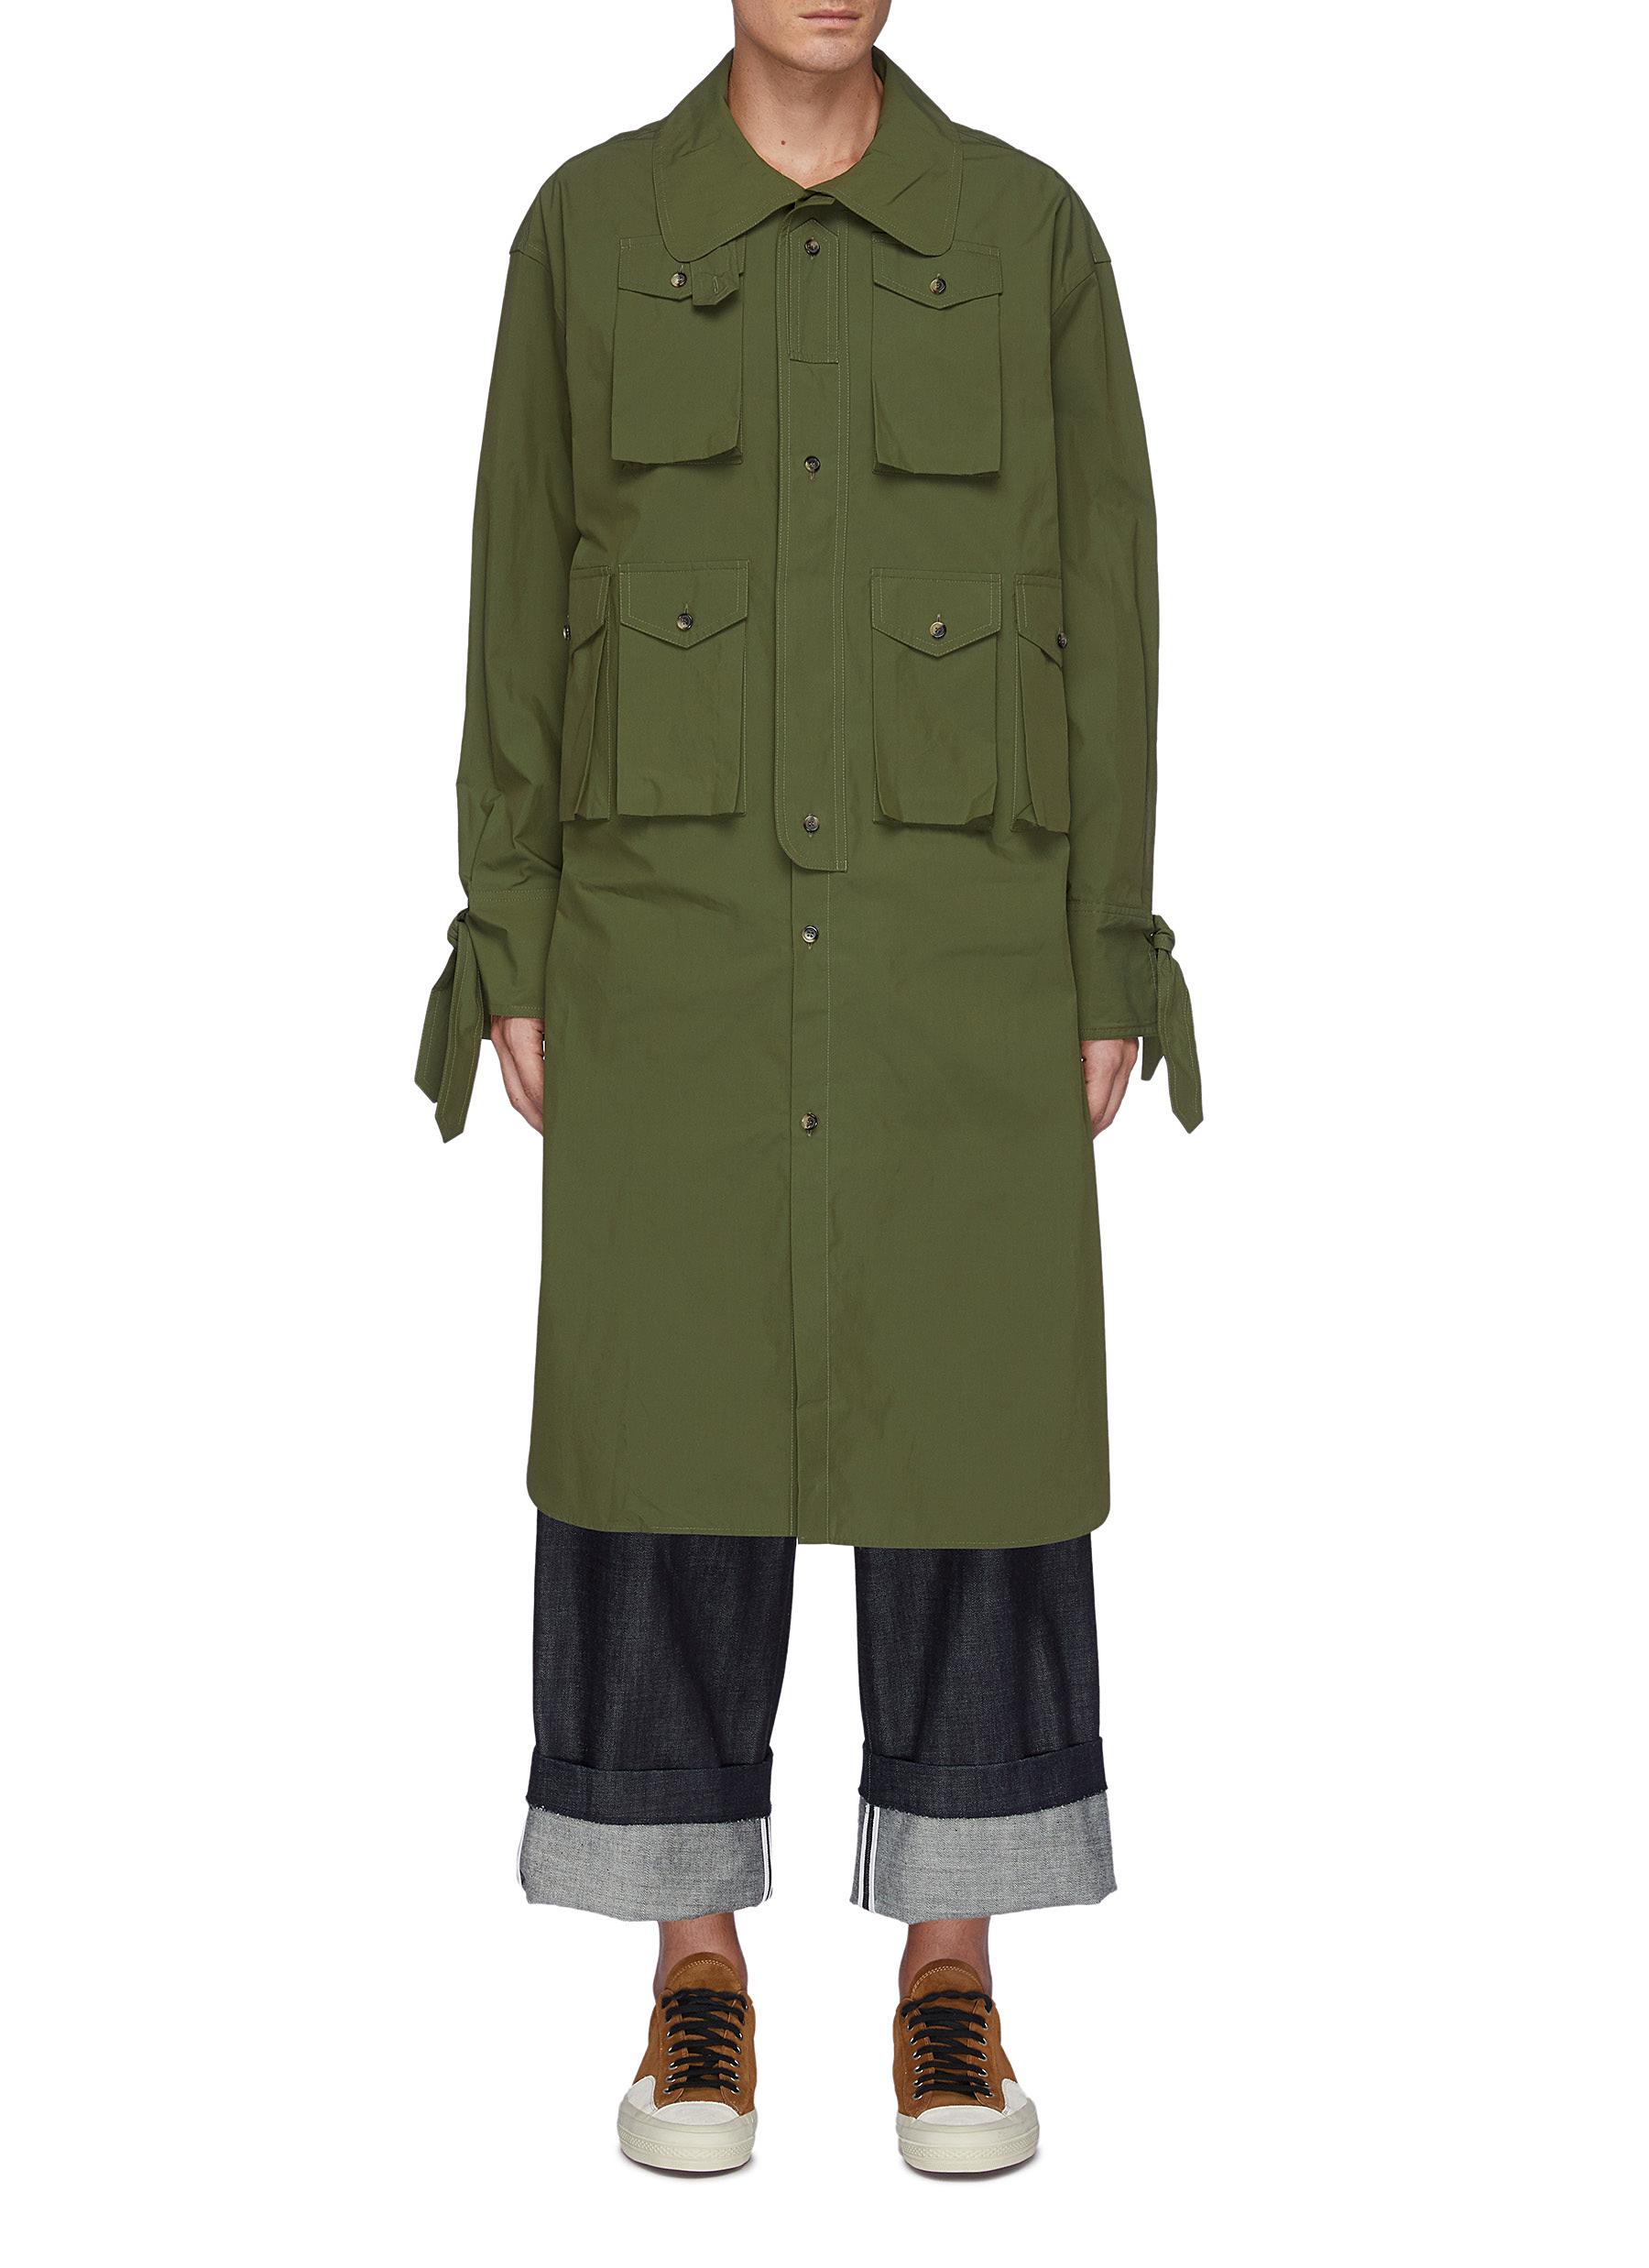 JW ANDERSON PATCH POCKET MILITARY TUNIC SHIRT